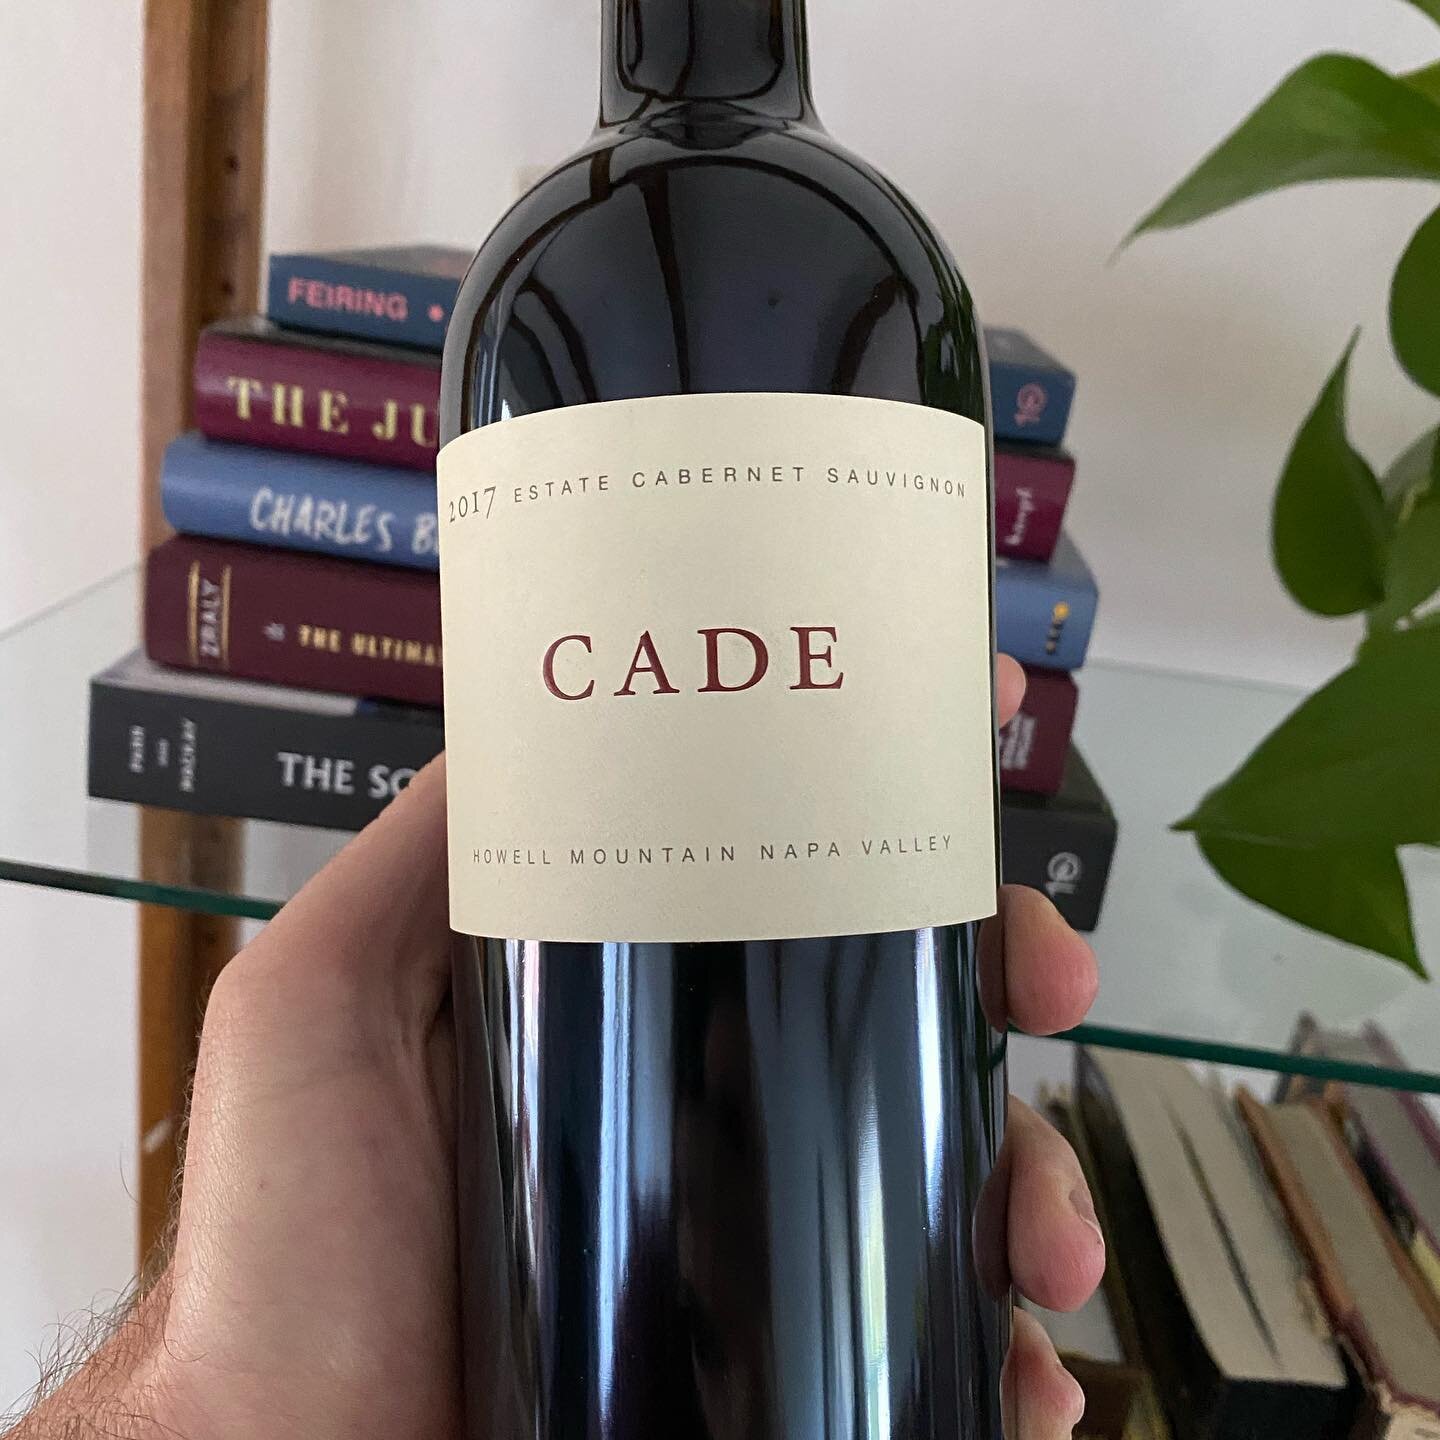 Cade Winery&rsquo;s Howell Mountain Estate in Napa Valley is, in a word, gorgeous. Their commitment to sustainable agriculture and producing organic wine has made them industry leaders, not just in Northern California, but in the winemaking community